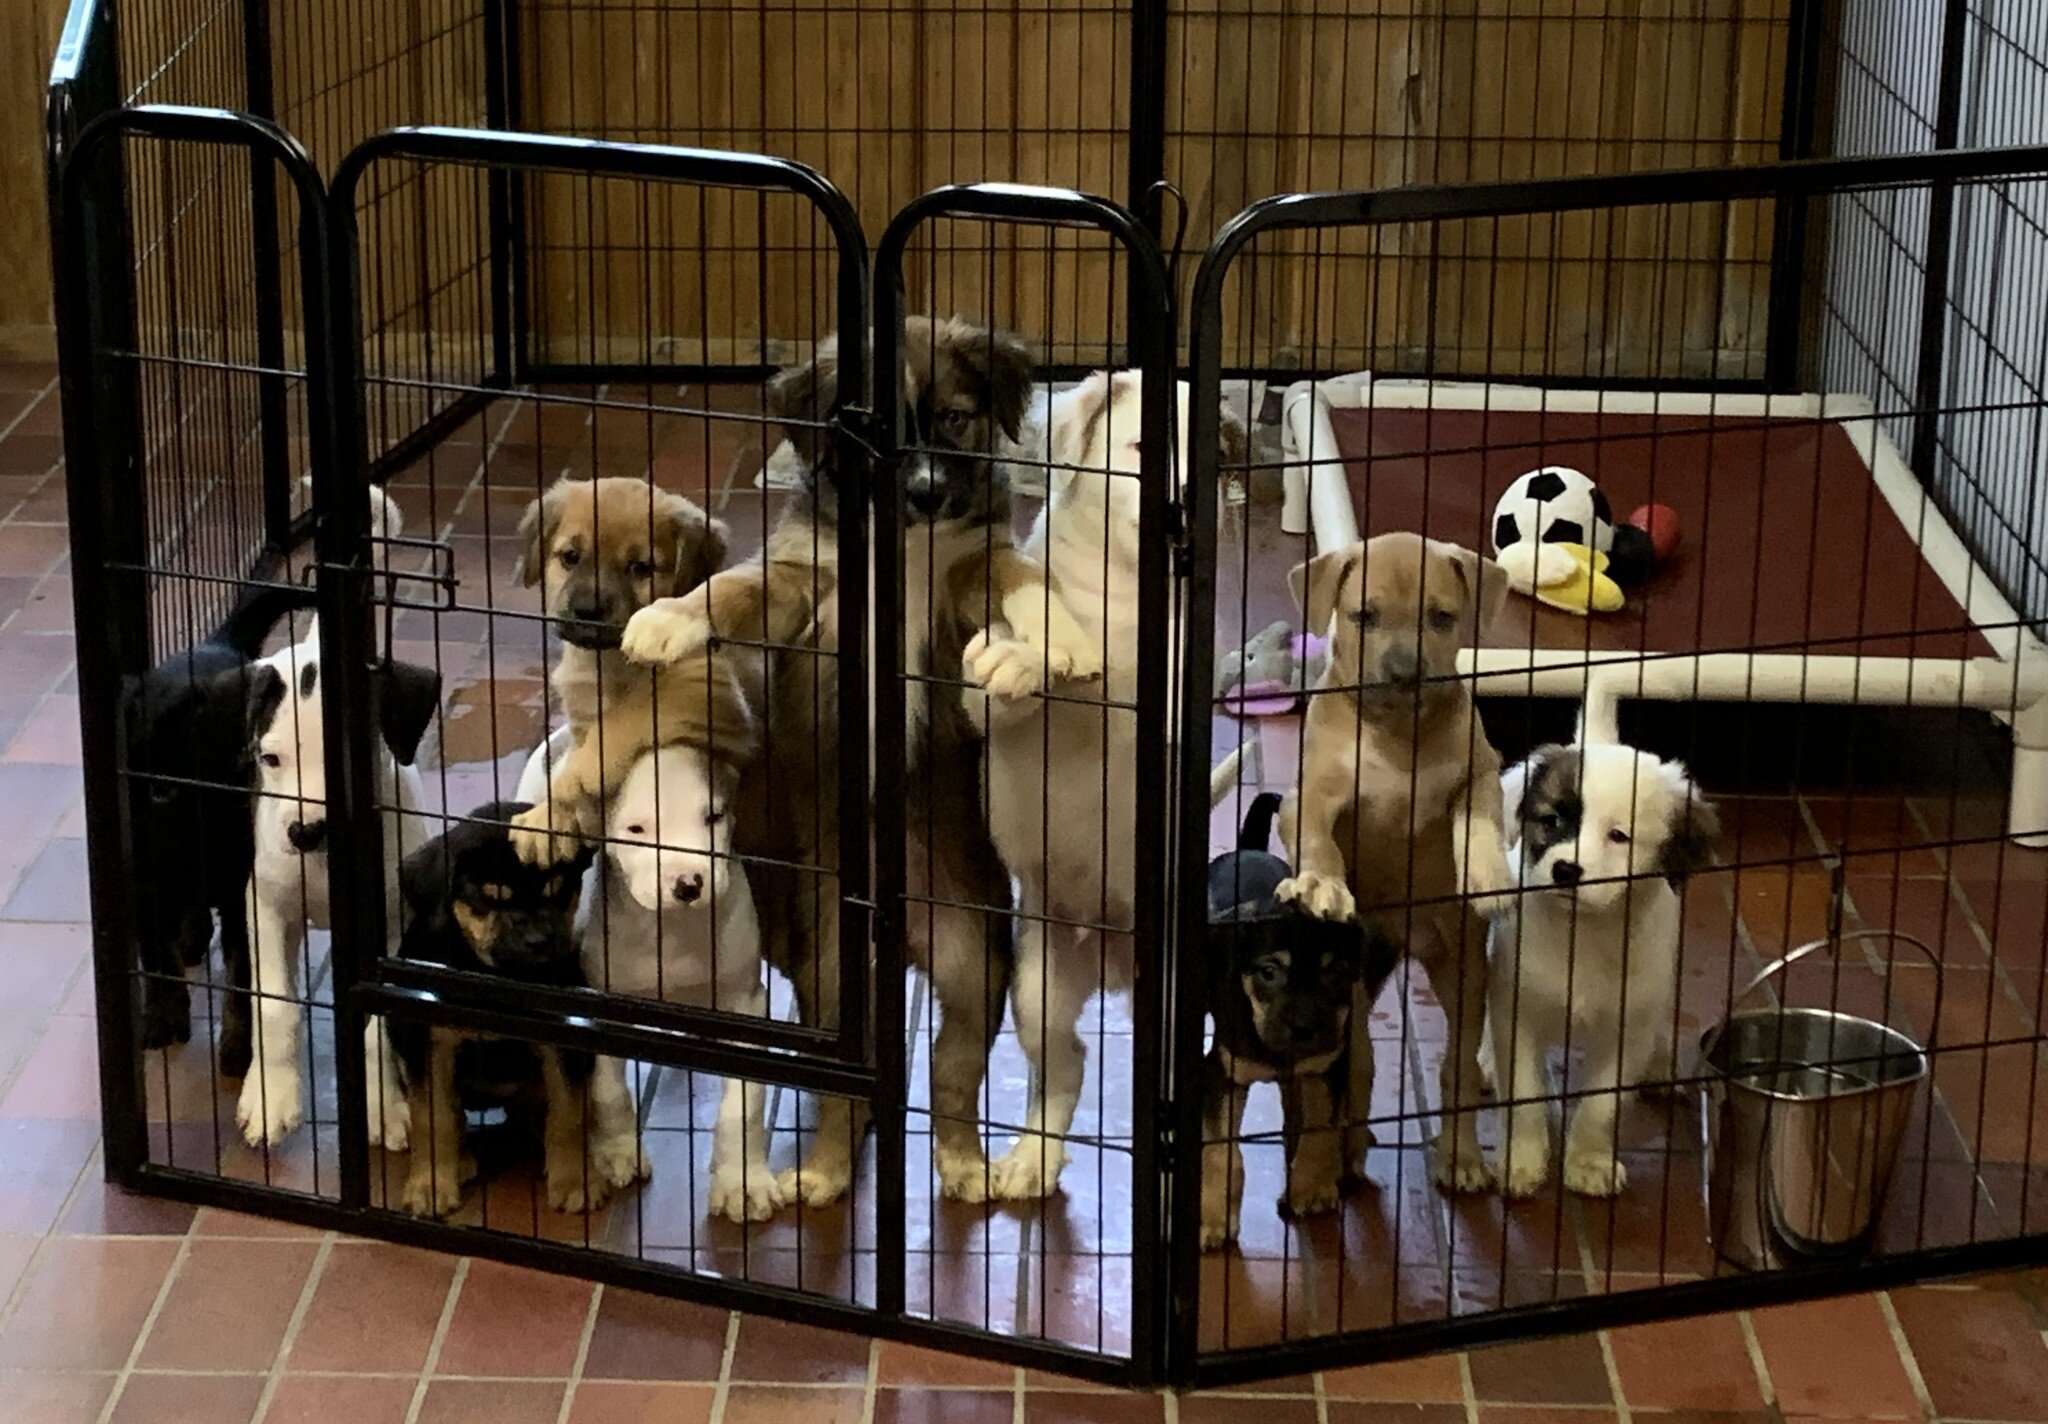 Patiently waiting for breakfast! 🥓🥞🥚
Some of these babies are still available to be reserved for adoption!
Check the details and apply to adopt here: https://www.animal-lifeline.com/adoptable-dogs